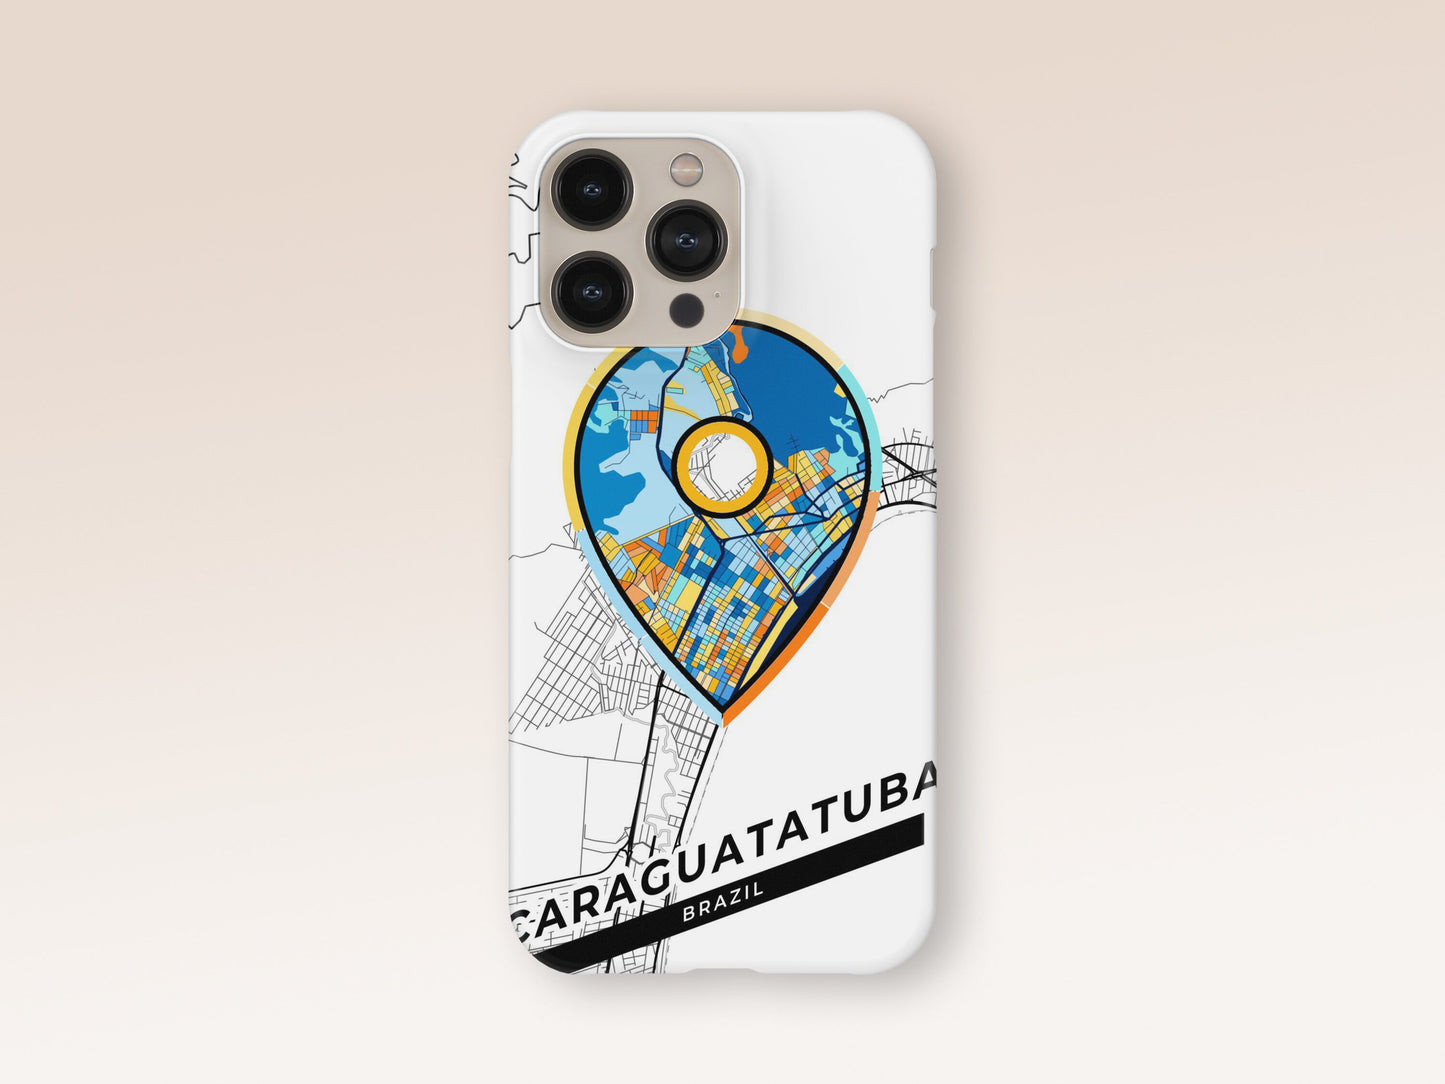 Caraguatatuba Brazil slim phone case with colorful icon. Birthday, wedding or housewarming gift. Couple match cases. 1